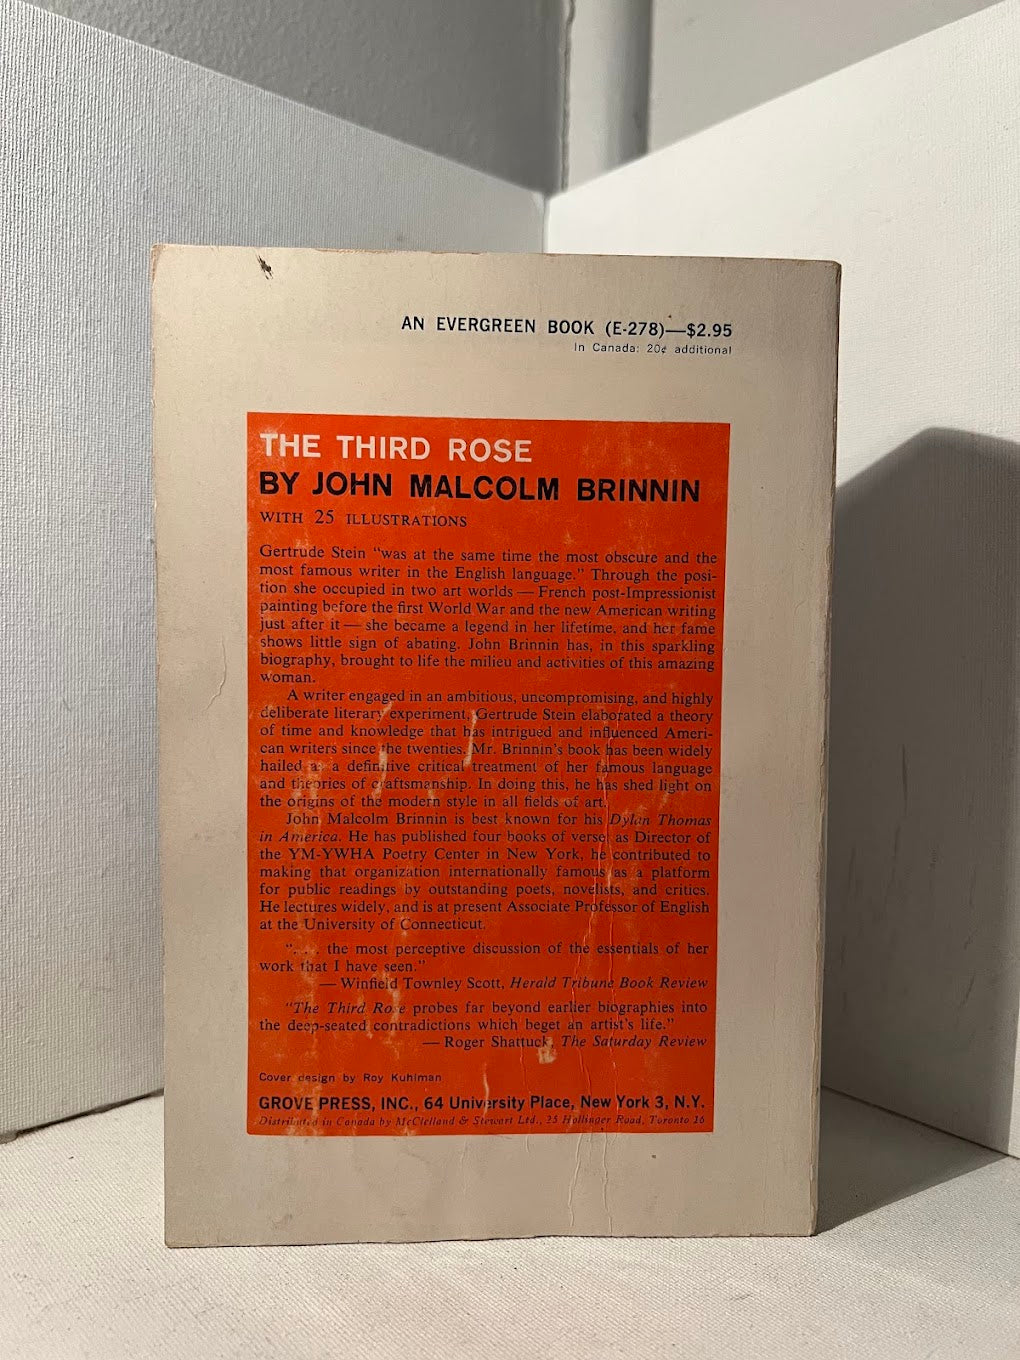 The Third Rose: Gertrude Stein and Her World by John Malcolm Brinnin